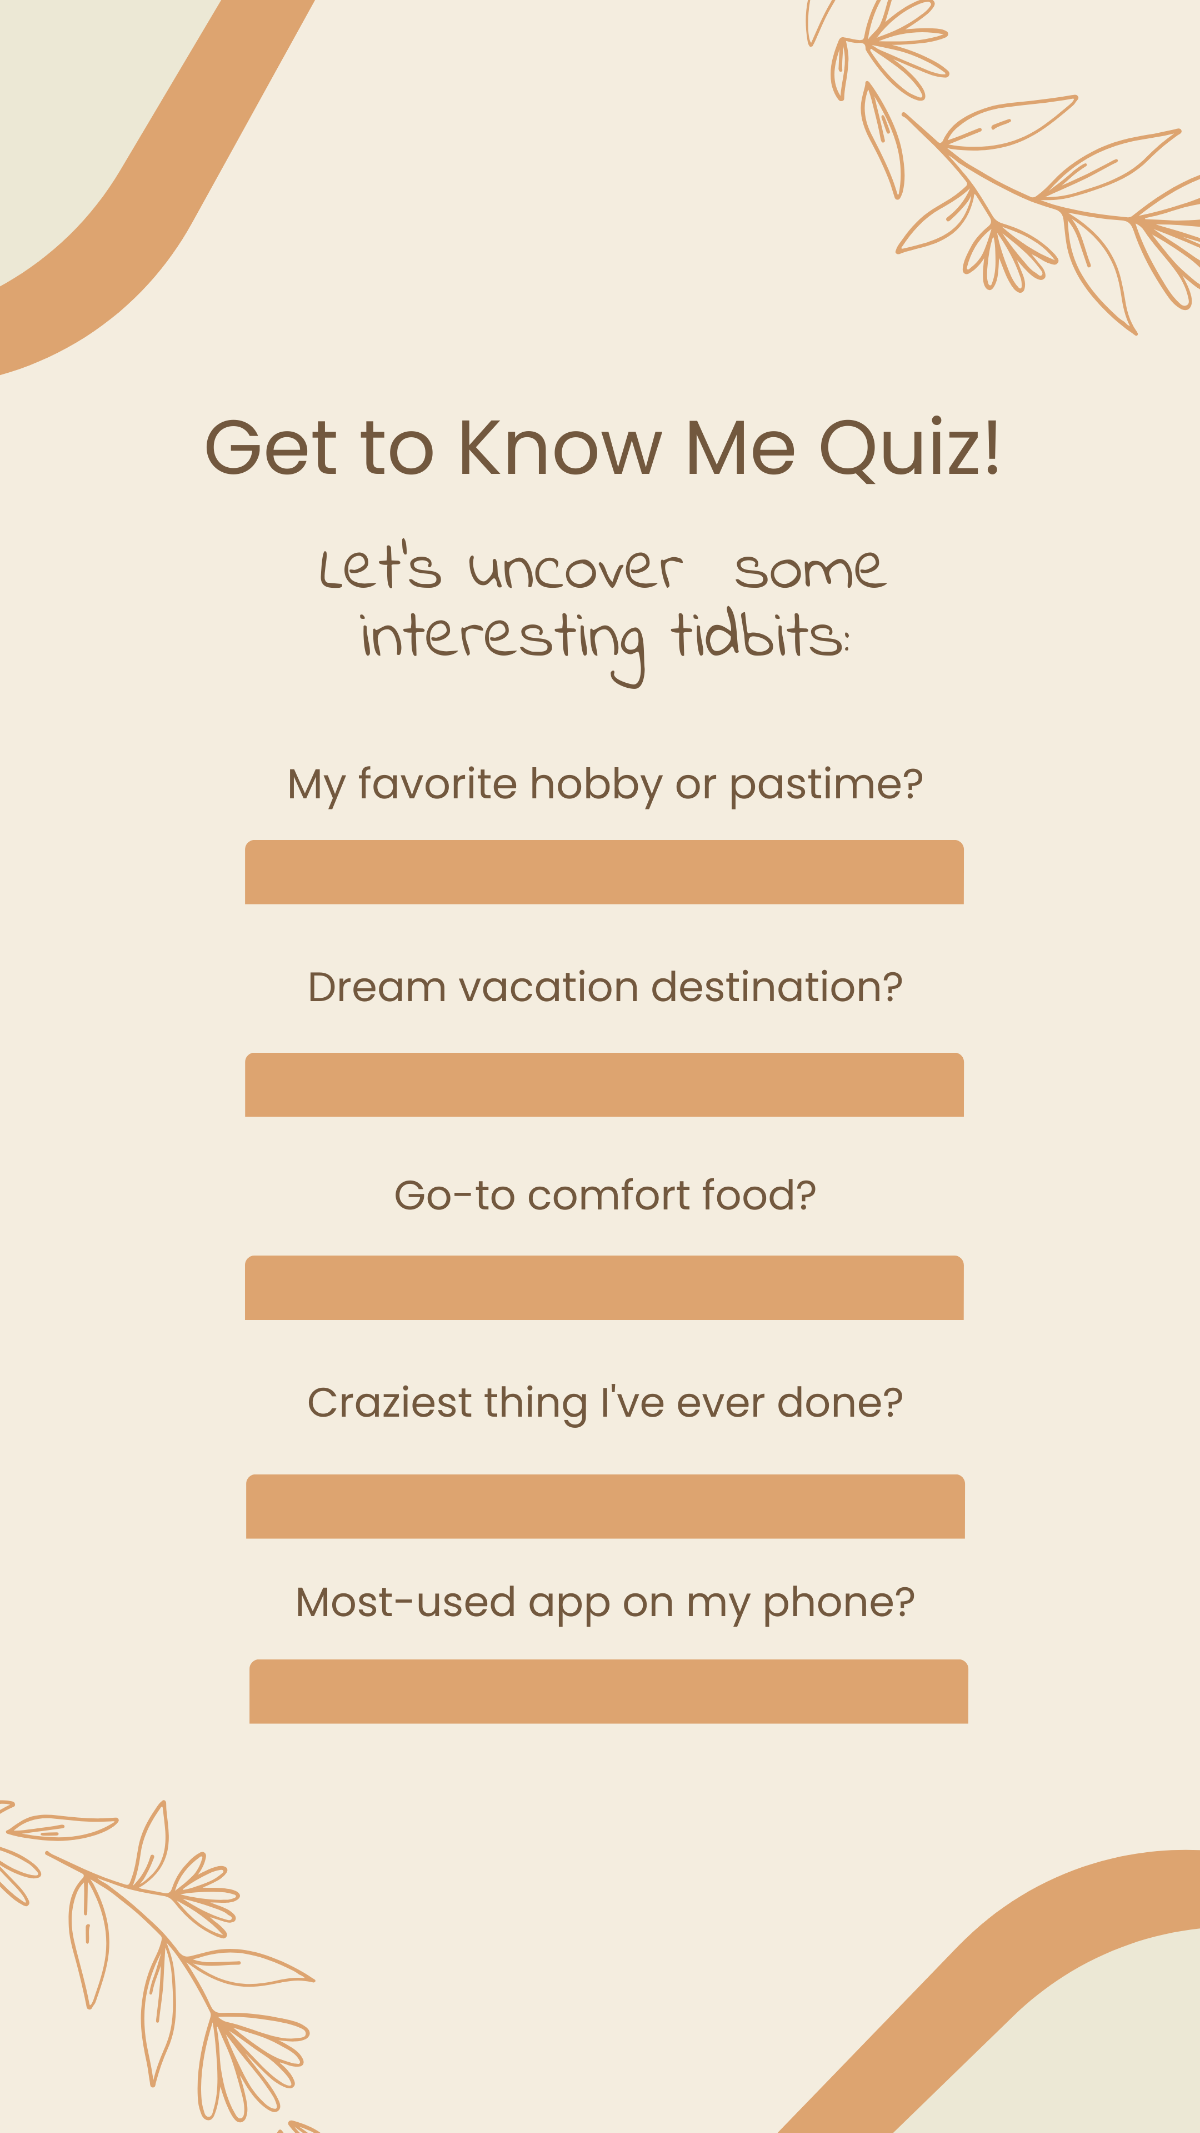 Get to Know Me Quiz Instagram Story Template